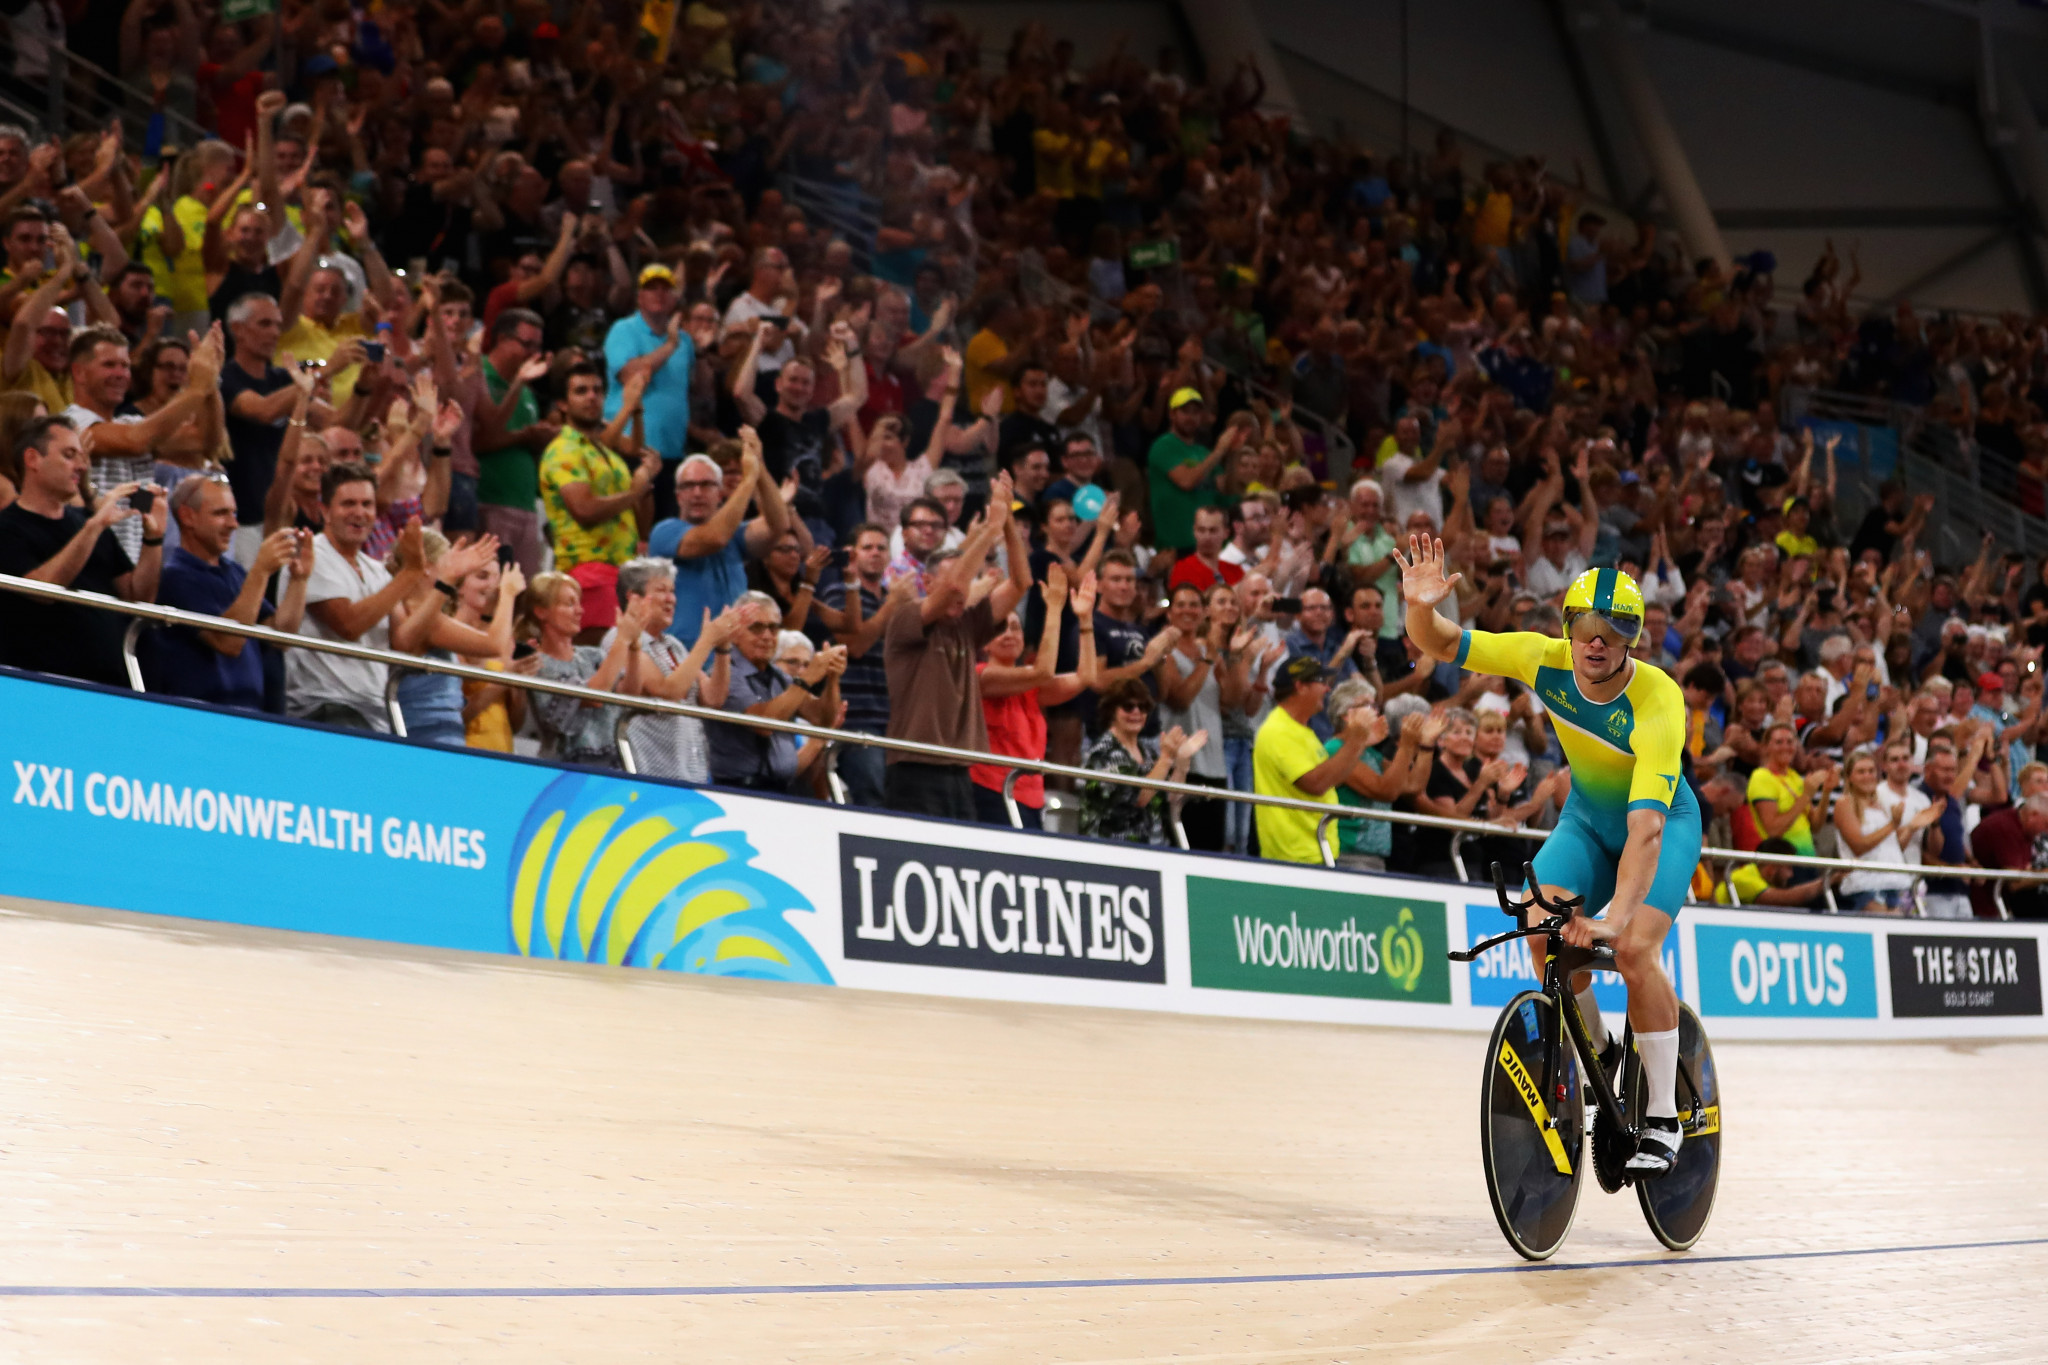 Matt Glaetzer was one of three Australians to claim a gold medal on the final day of track cycling competition, winning the men's 1,000m time trial final in a Commonwealth Games record time ©Getty Images